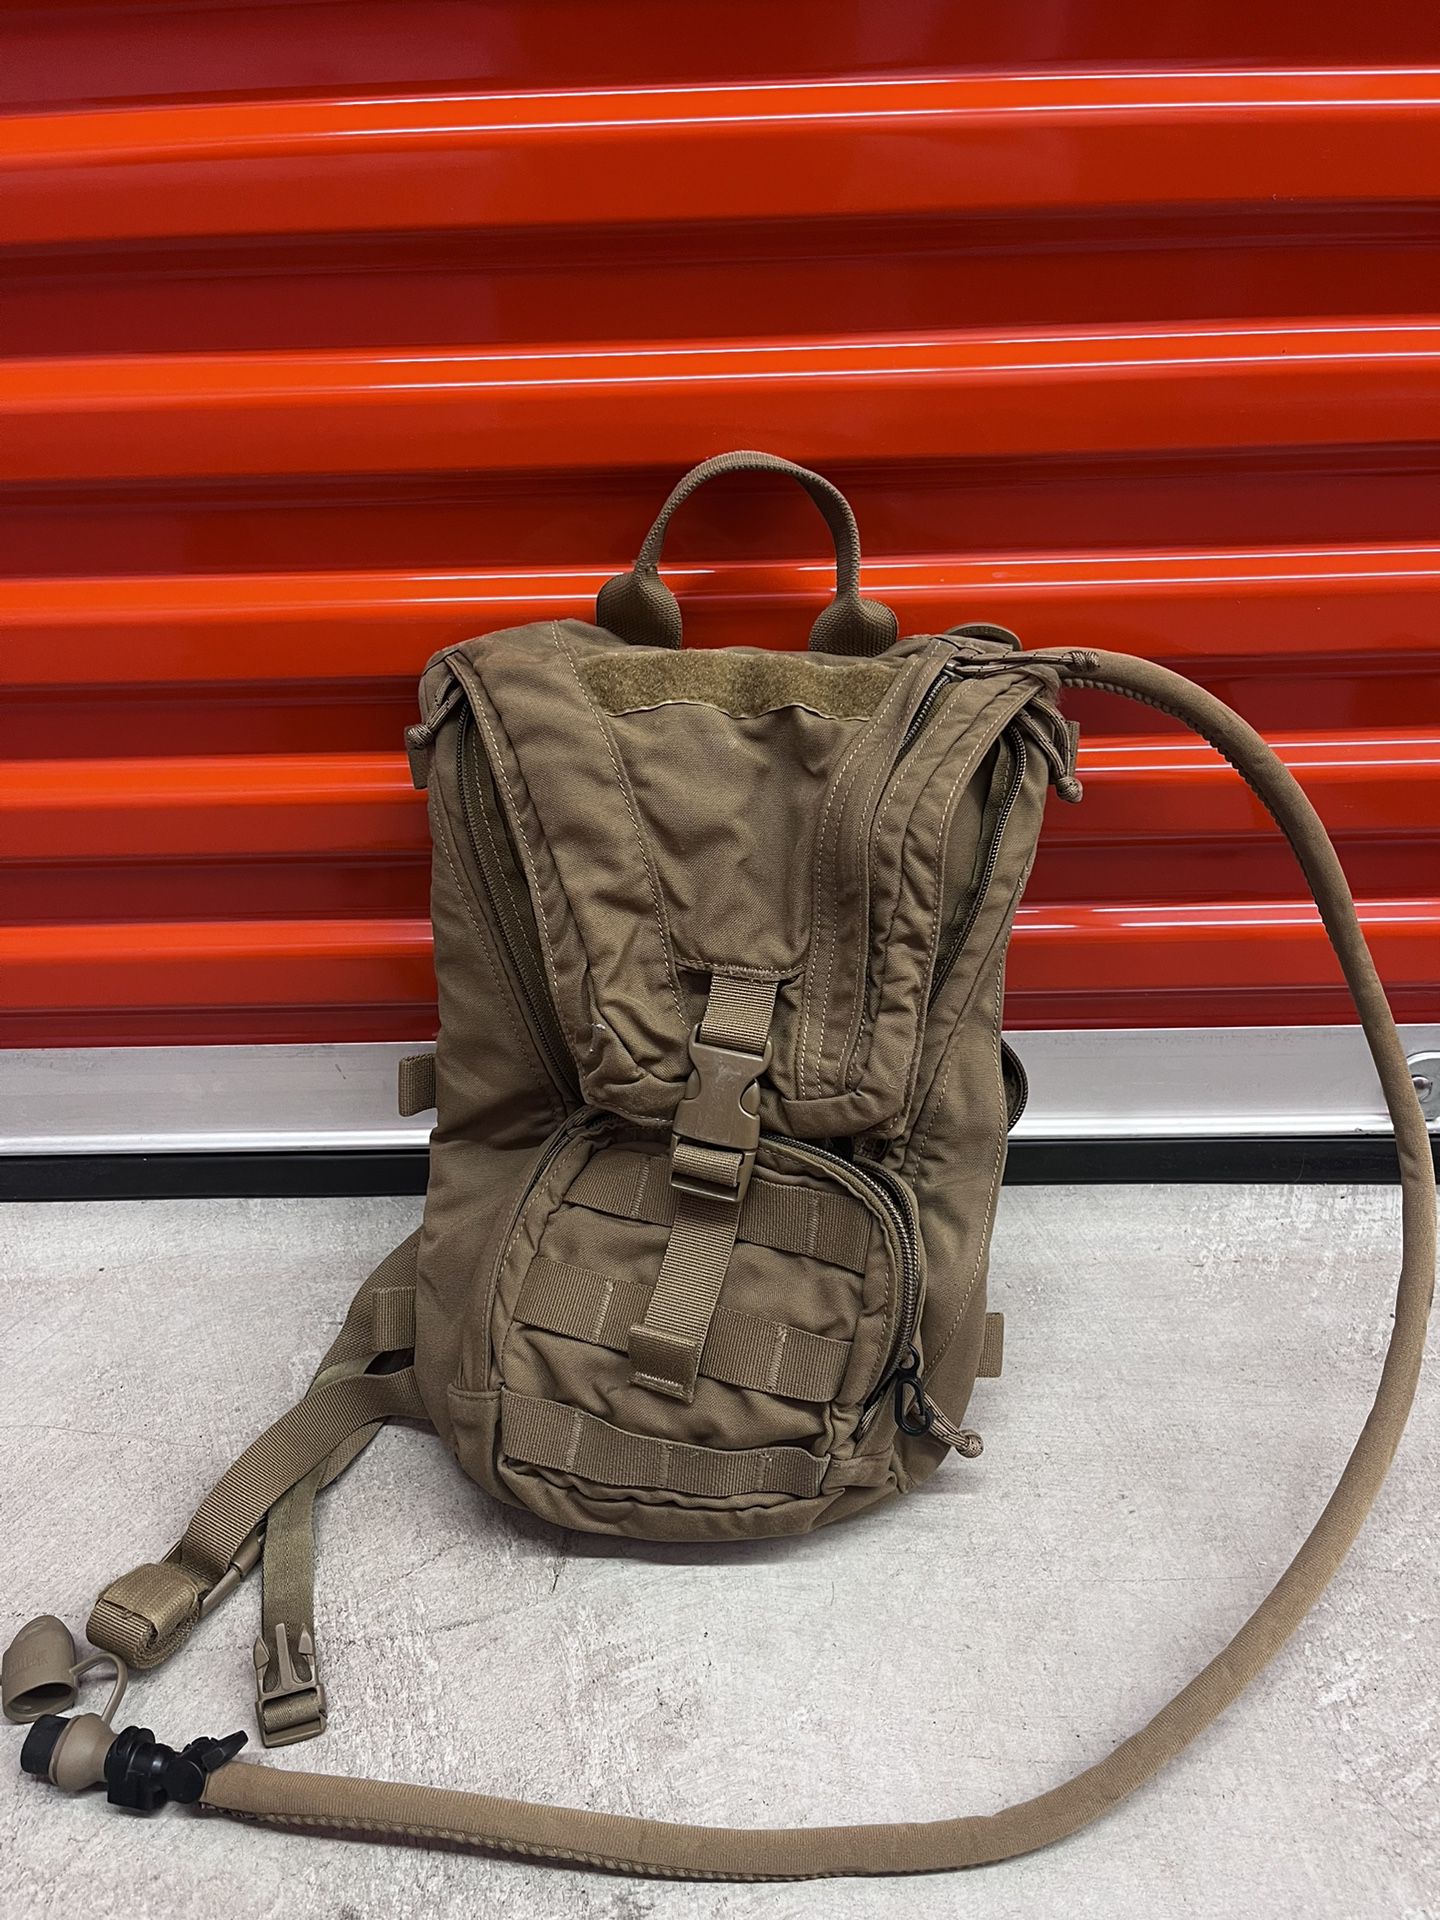 Military Style Camelbak Water Backpack